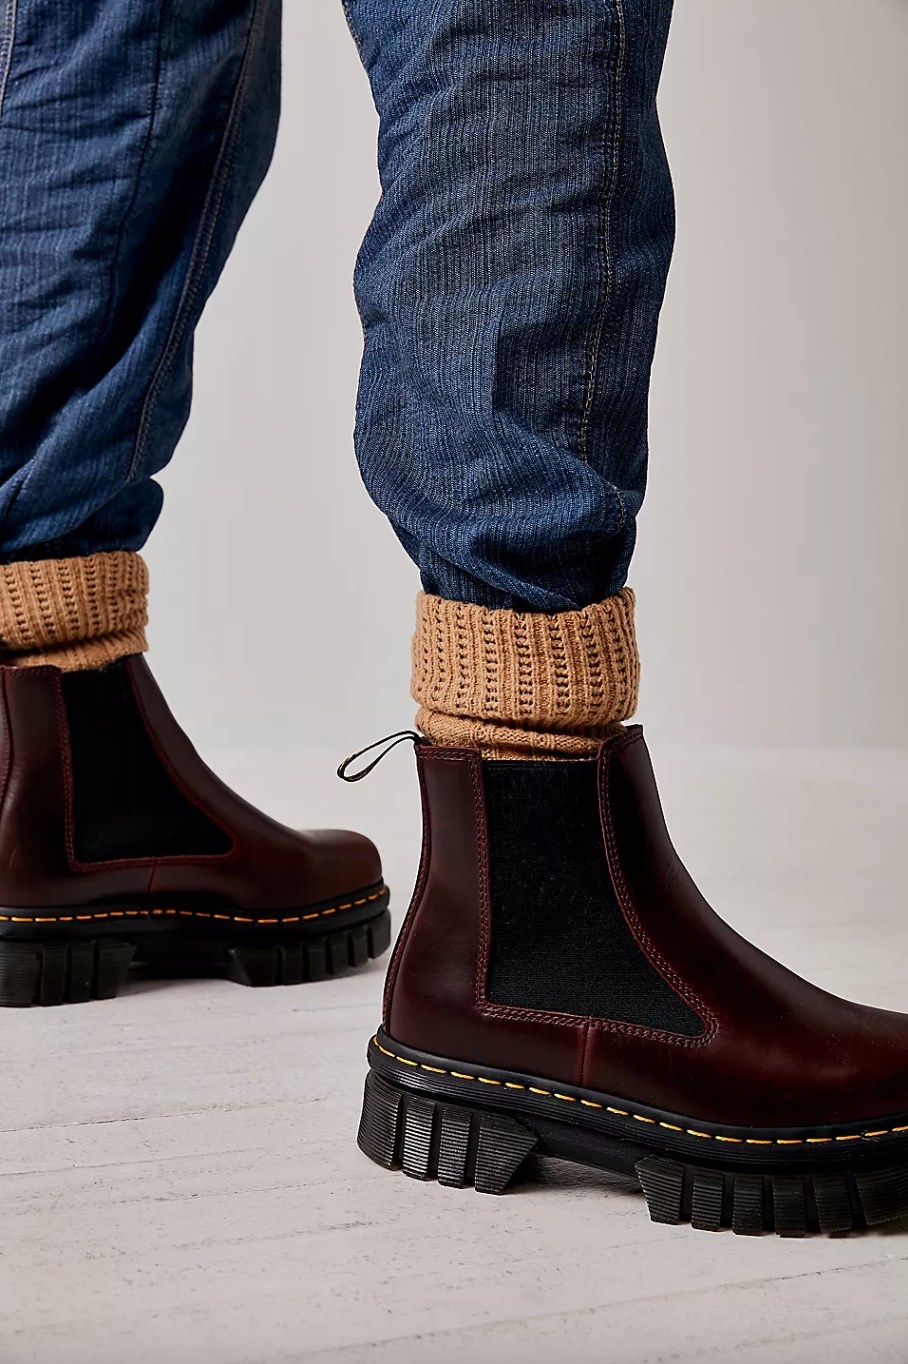 a model wearing the dark red boots with tan socks and jeans